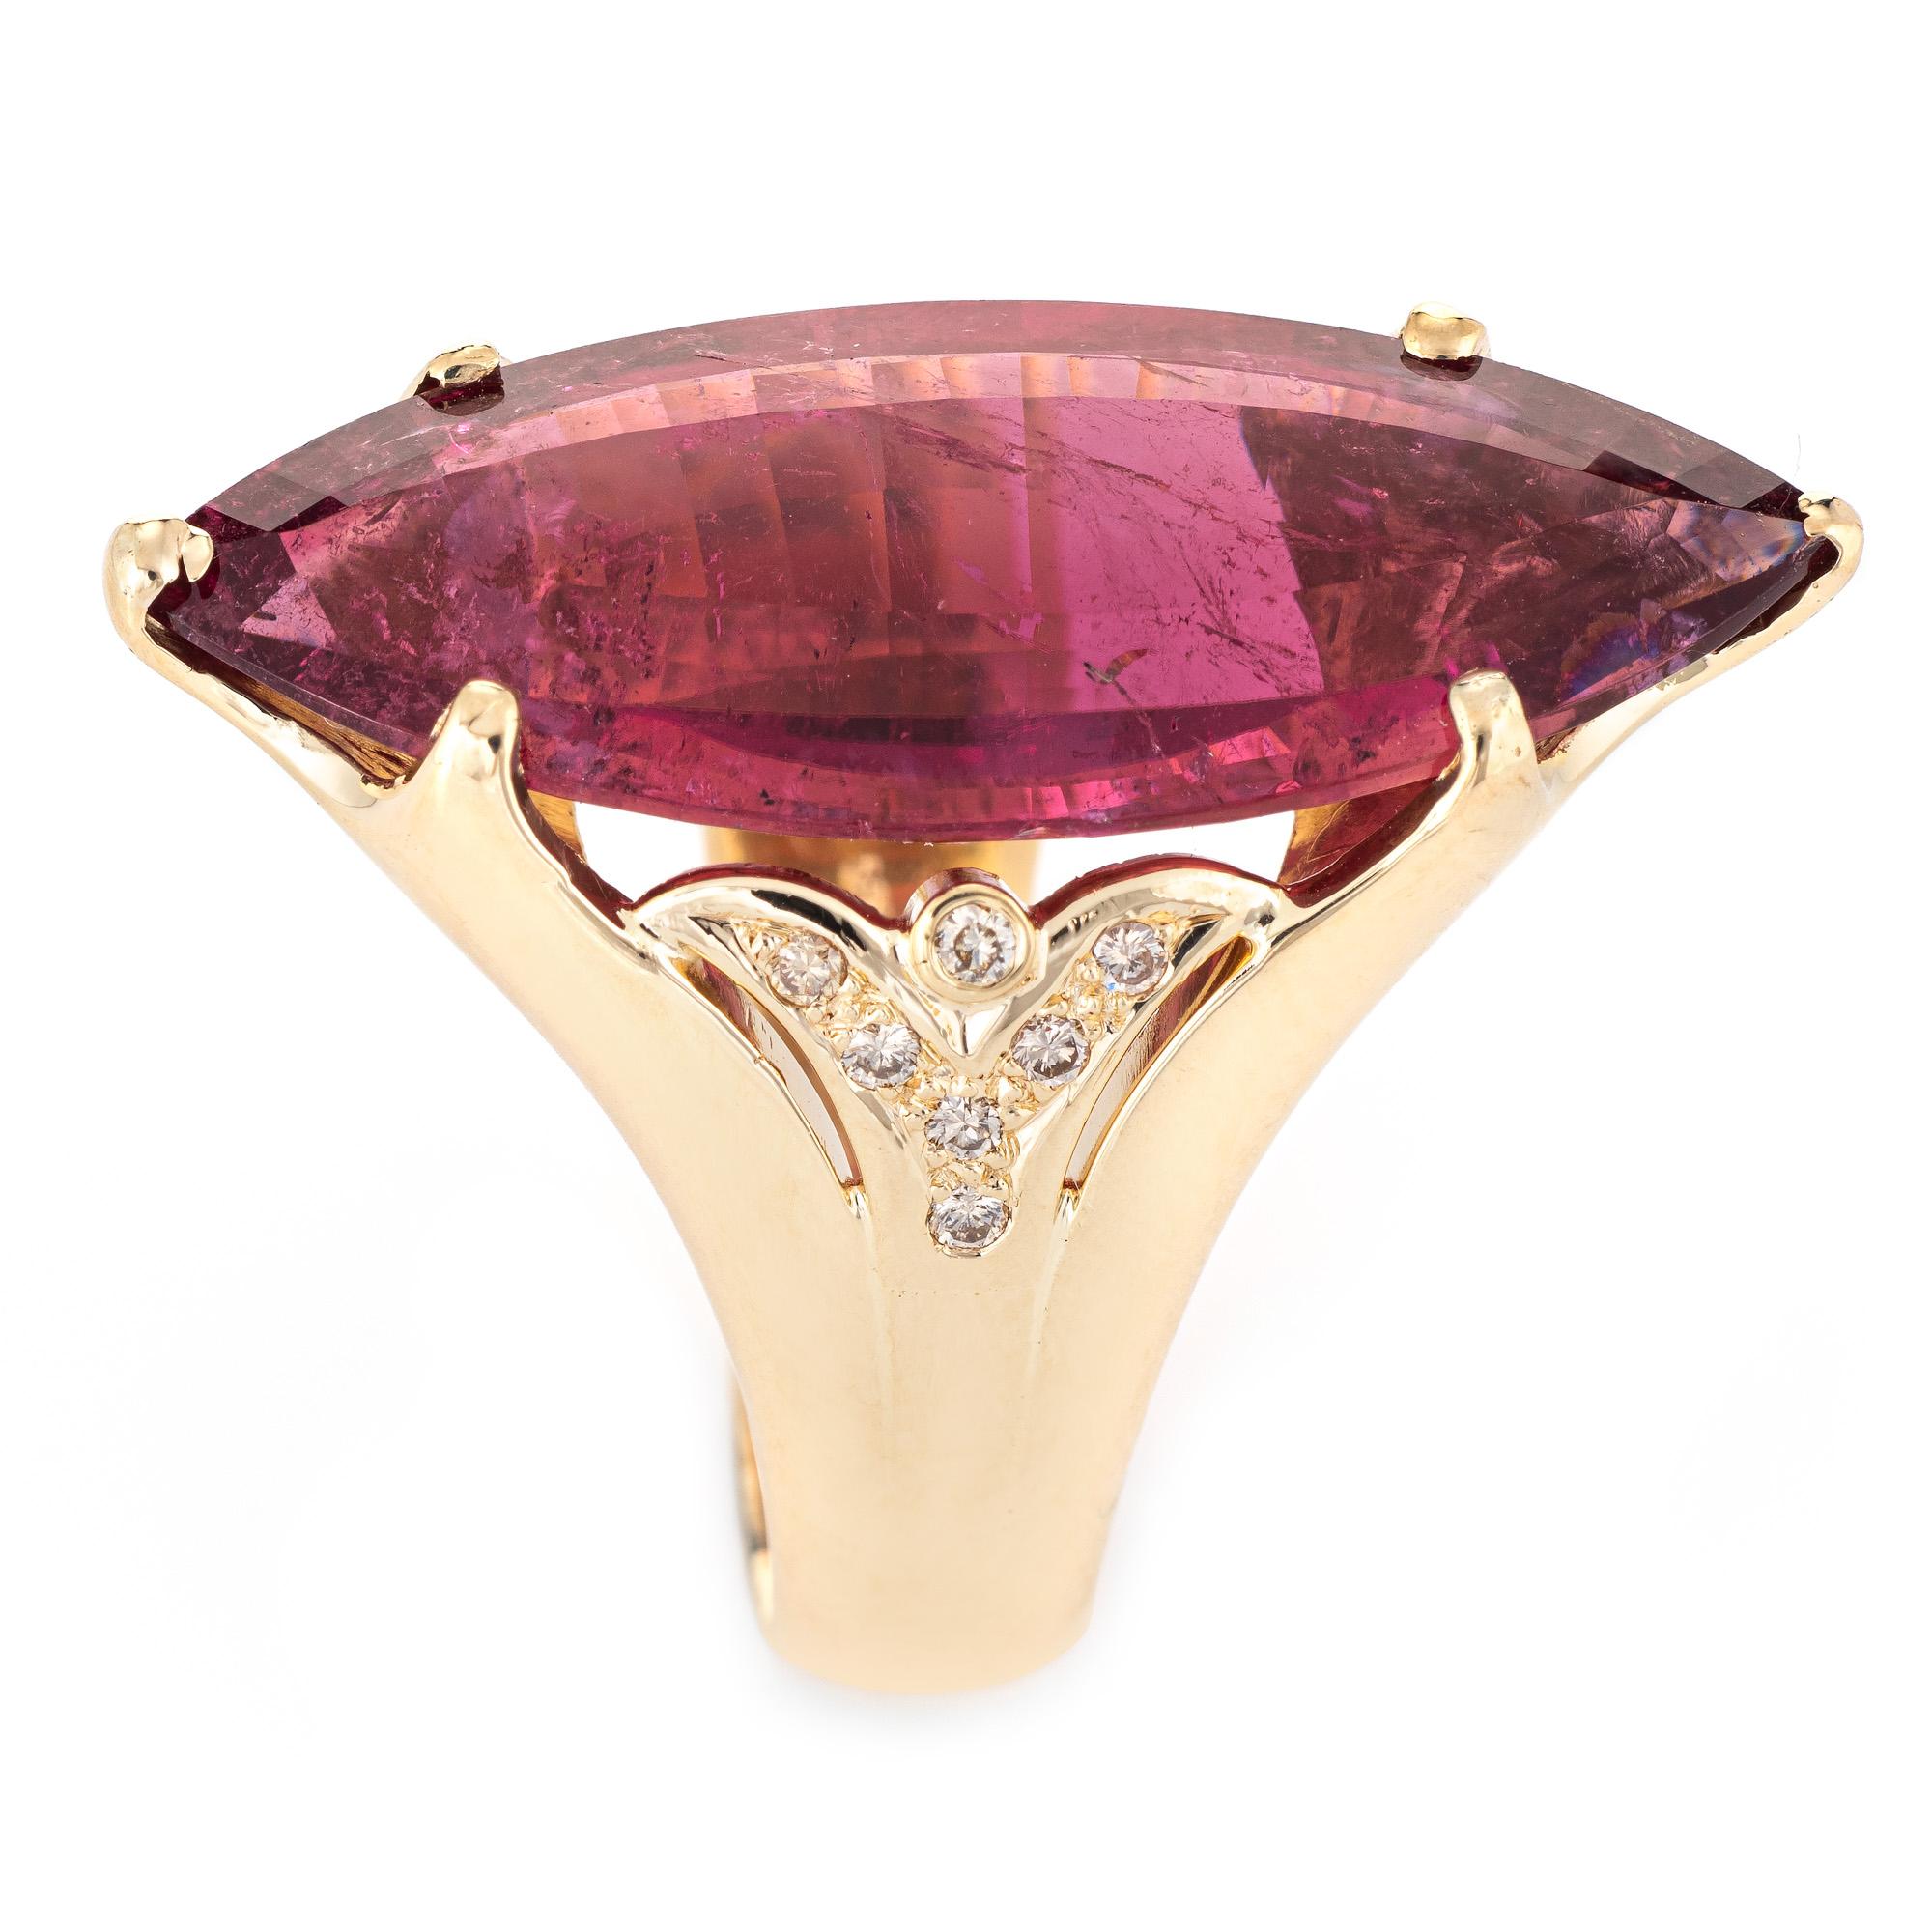 Striking vintage pink tourmaline & diamond cocktail ring (circa 1970s to 1980s) crafted in 14 karat yellow gold. 

Marquise shaped step cut pink tourmaline measures 33mm x 14mm (estimated at 20 carats), accented with an estimated 0.10 carats of